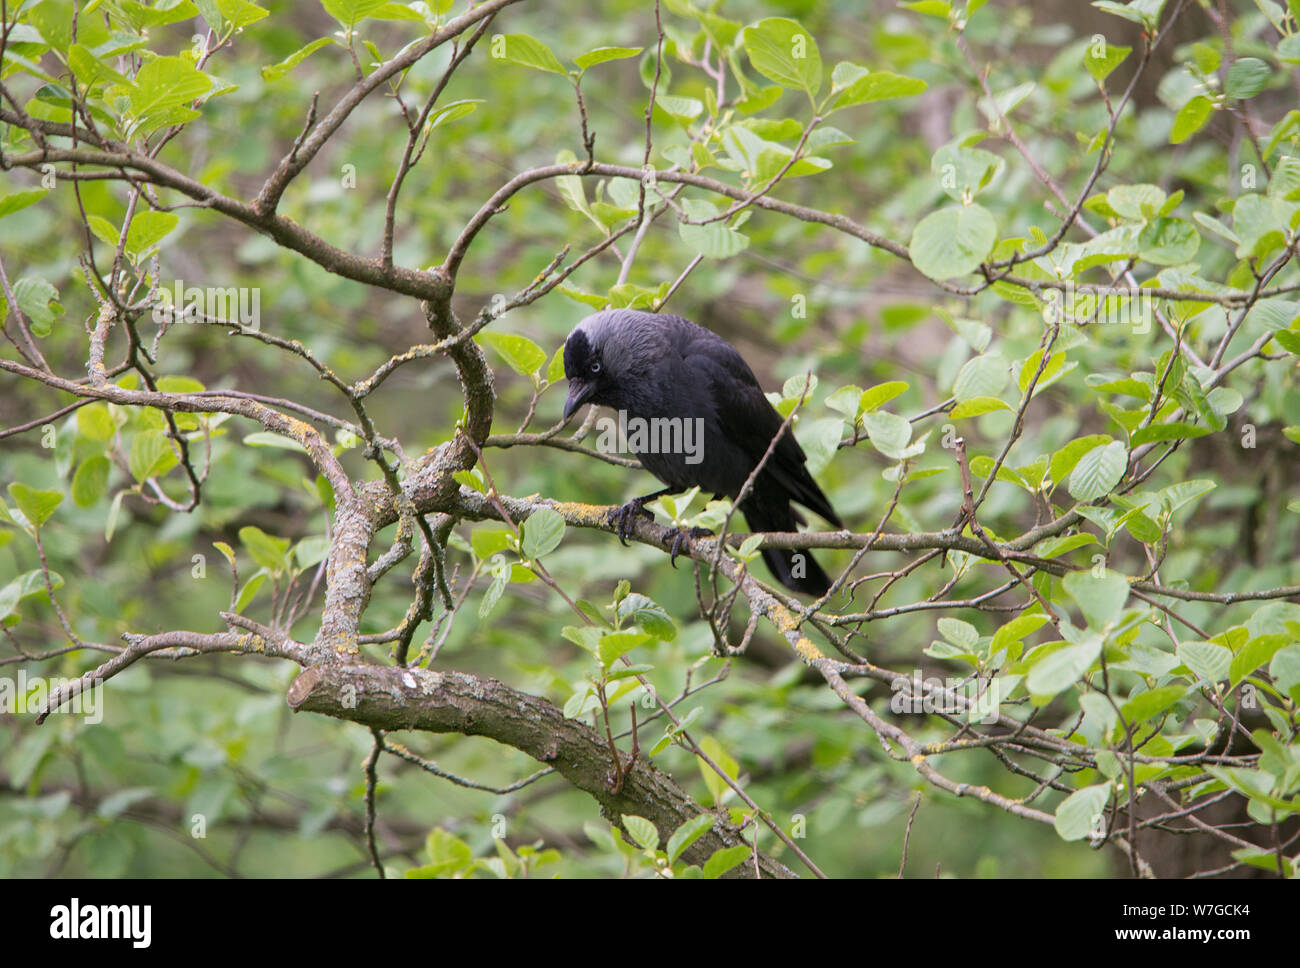 Jackdaw perched among branches of tree looking menacing Stock Photo